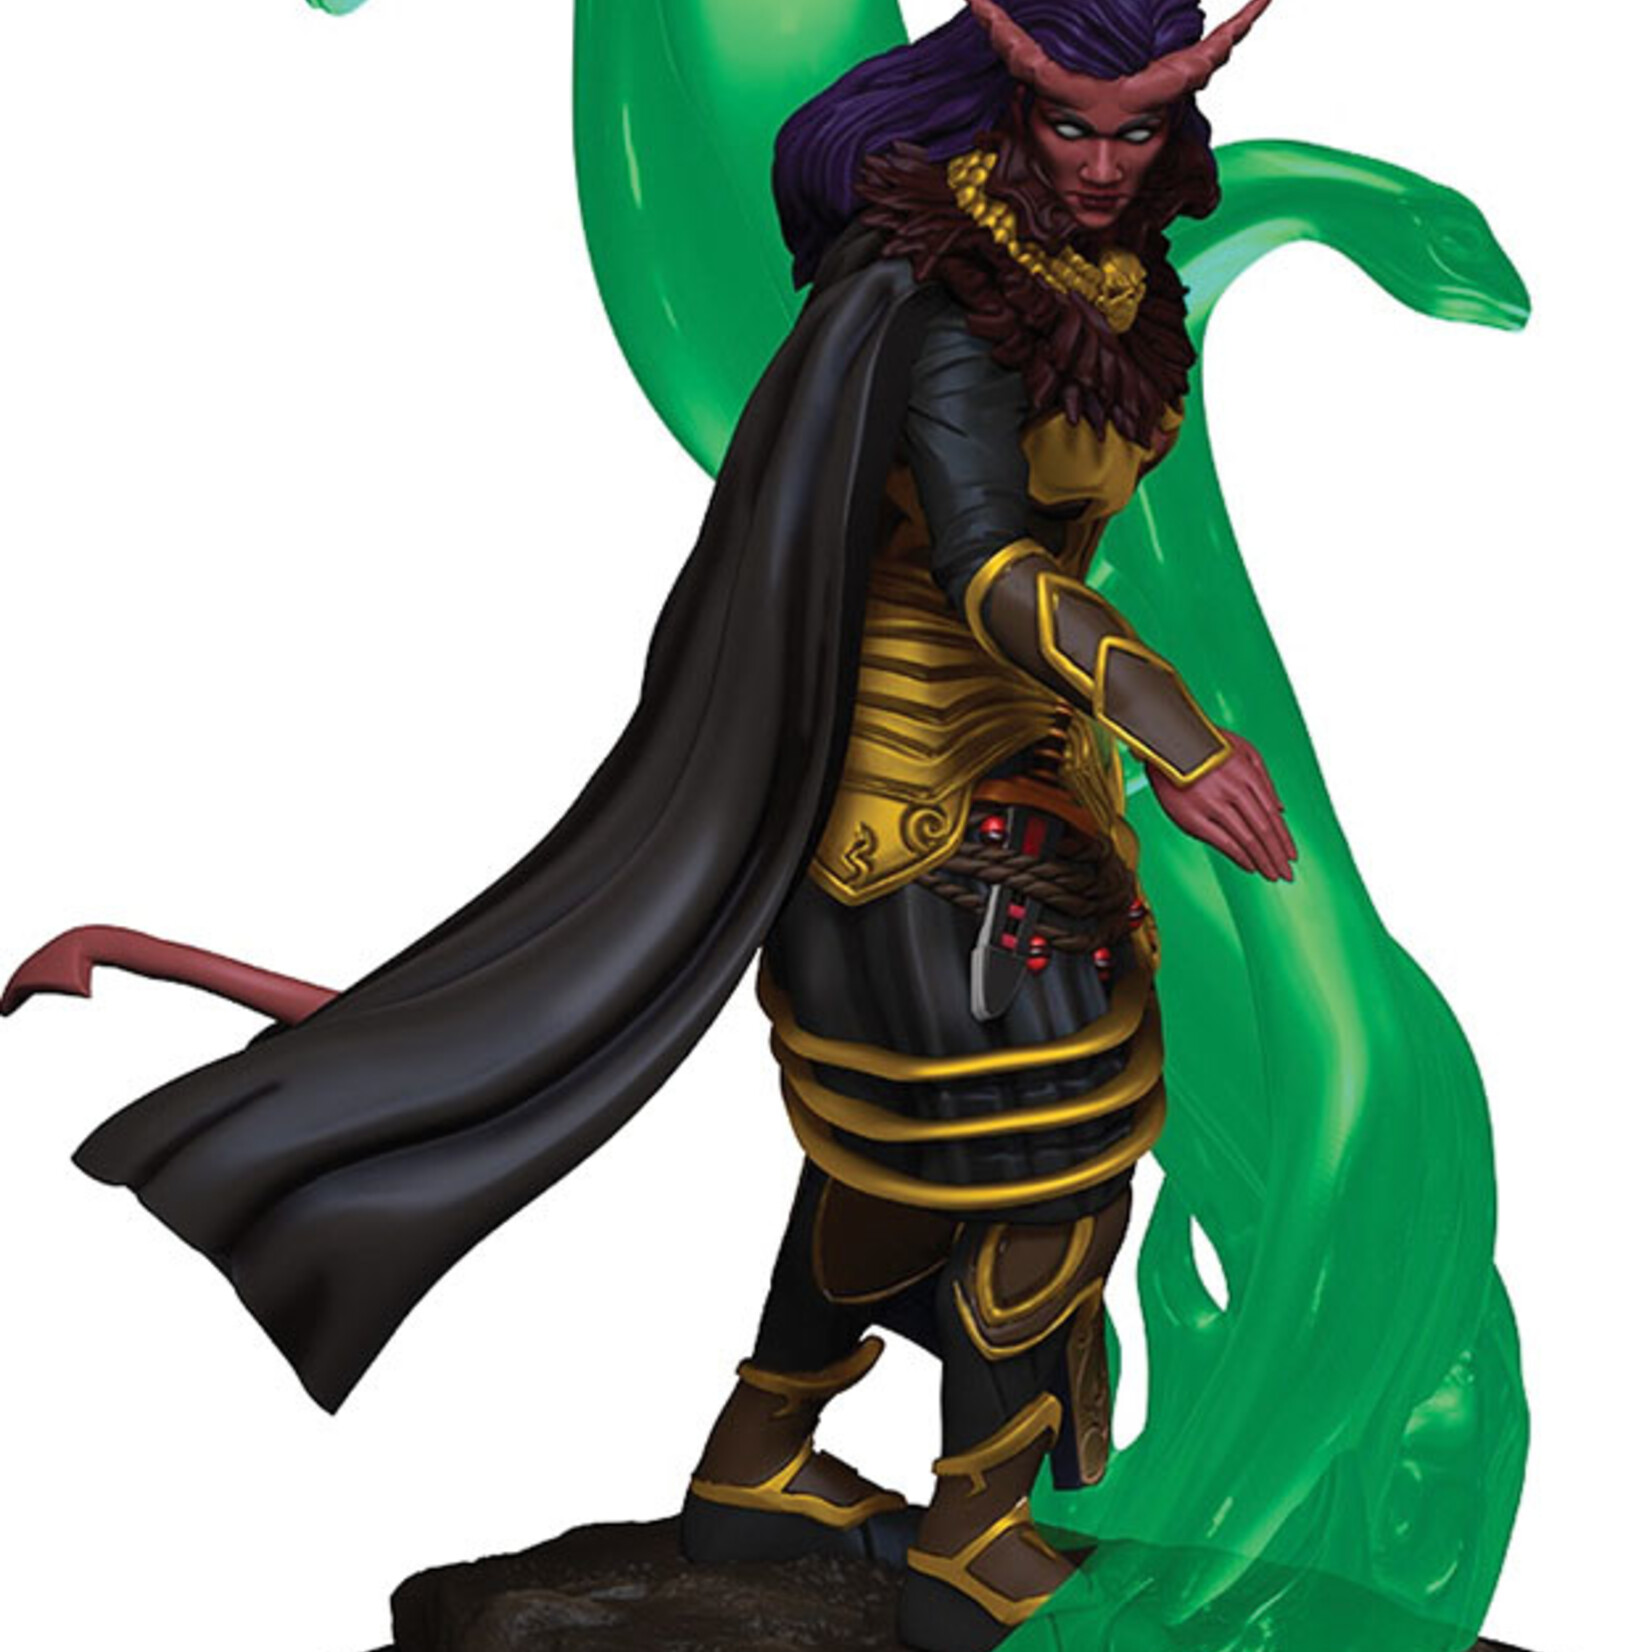 WizKids Dungeons & Dragons Icons of the Realms Premium Figures: W1 Tiefling Female Sorcerer